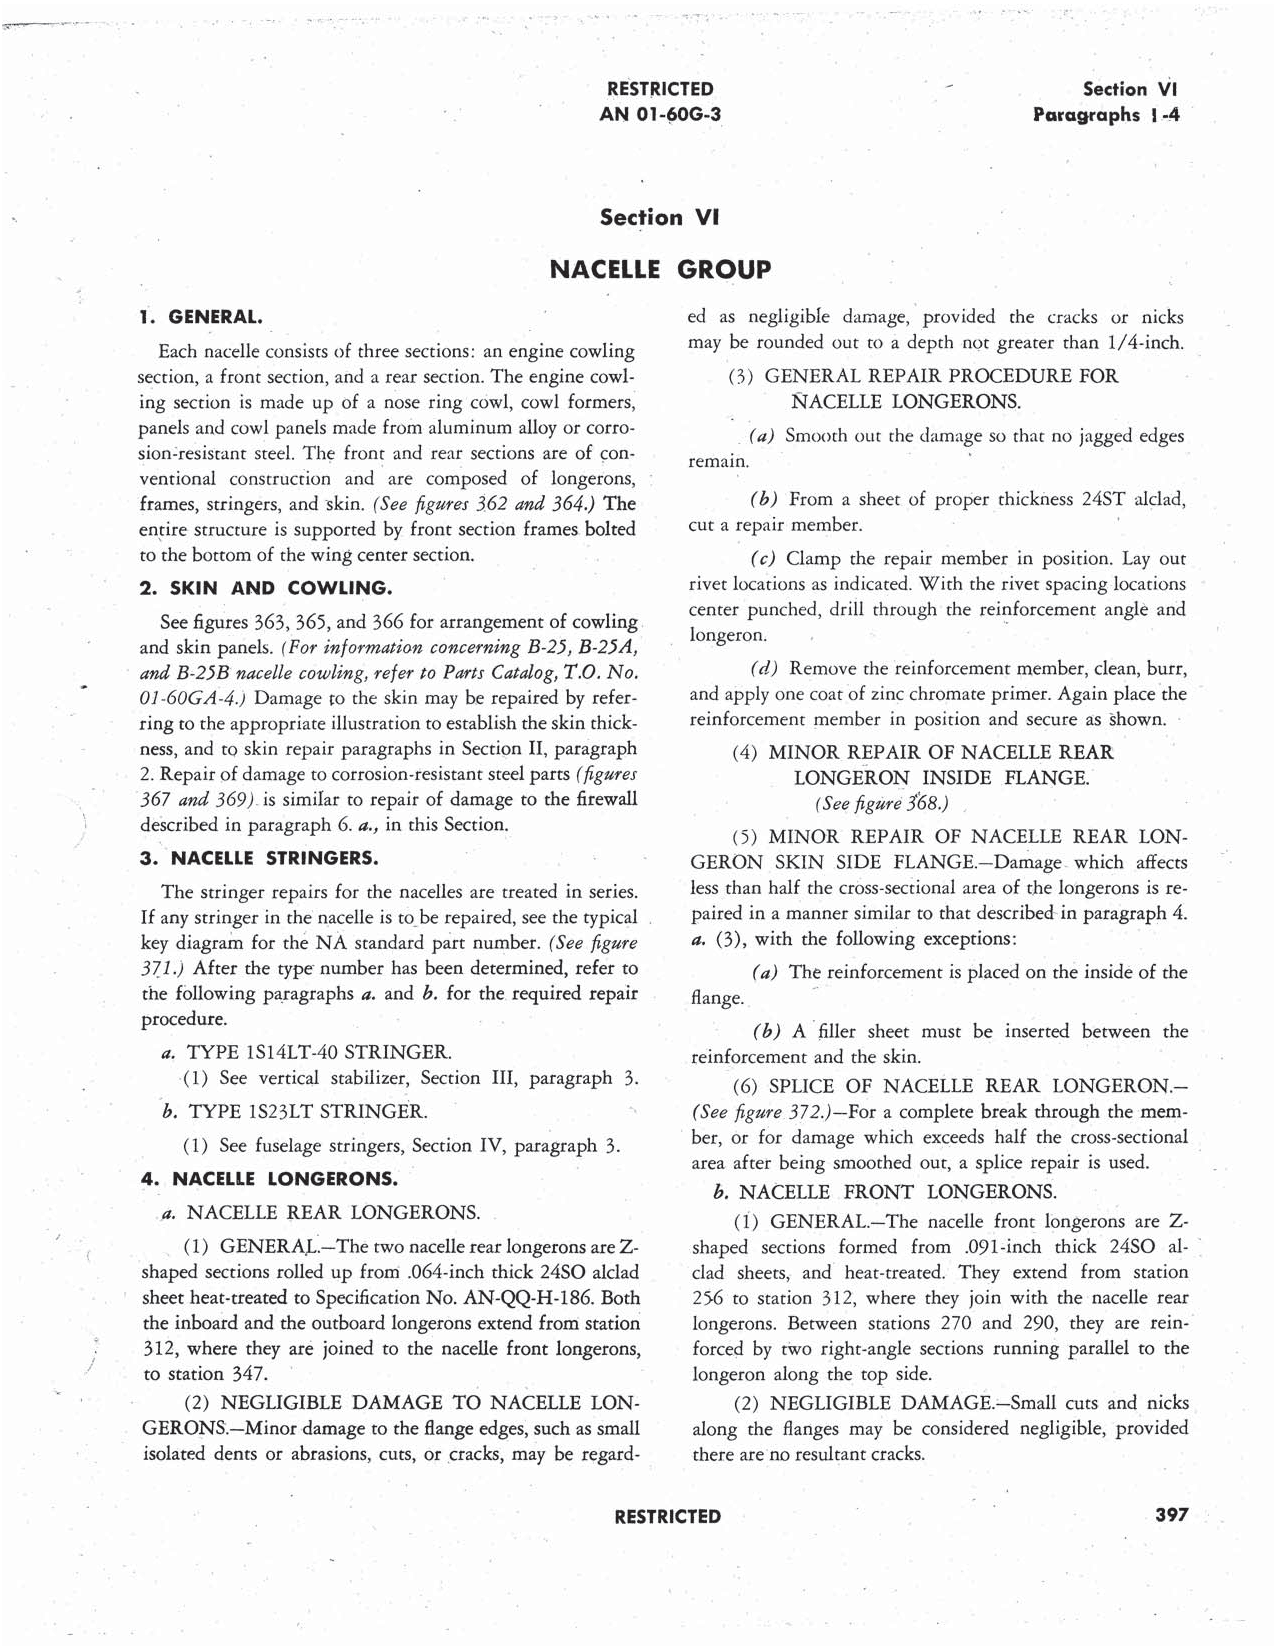 Sample page 430 from AirCorps Library document: Structural Repair Instructions - B-25